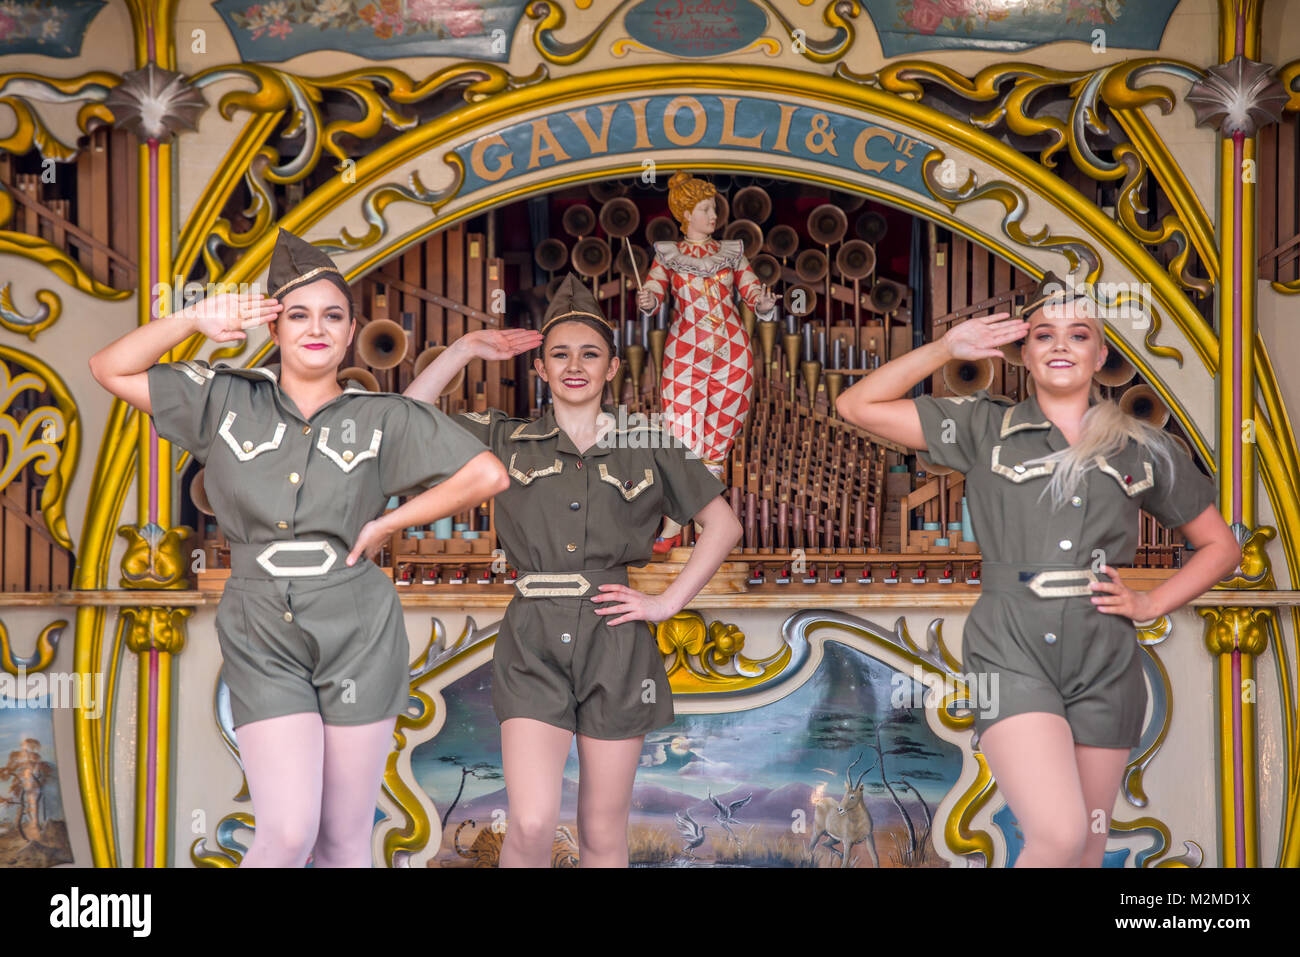 Young female dancers in military outfits stand at salute on top of fairground organ, Masham, North Yorkshire, UK Stock Photo